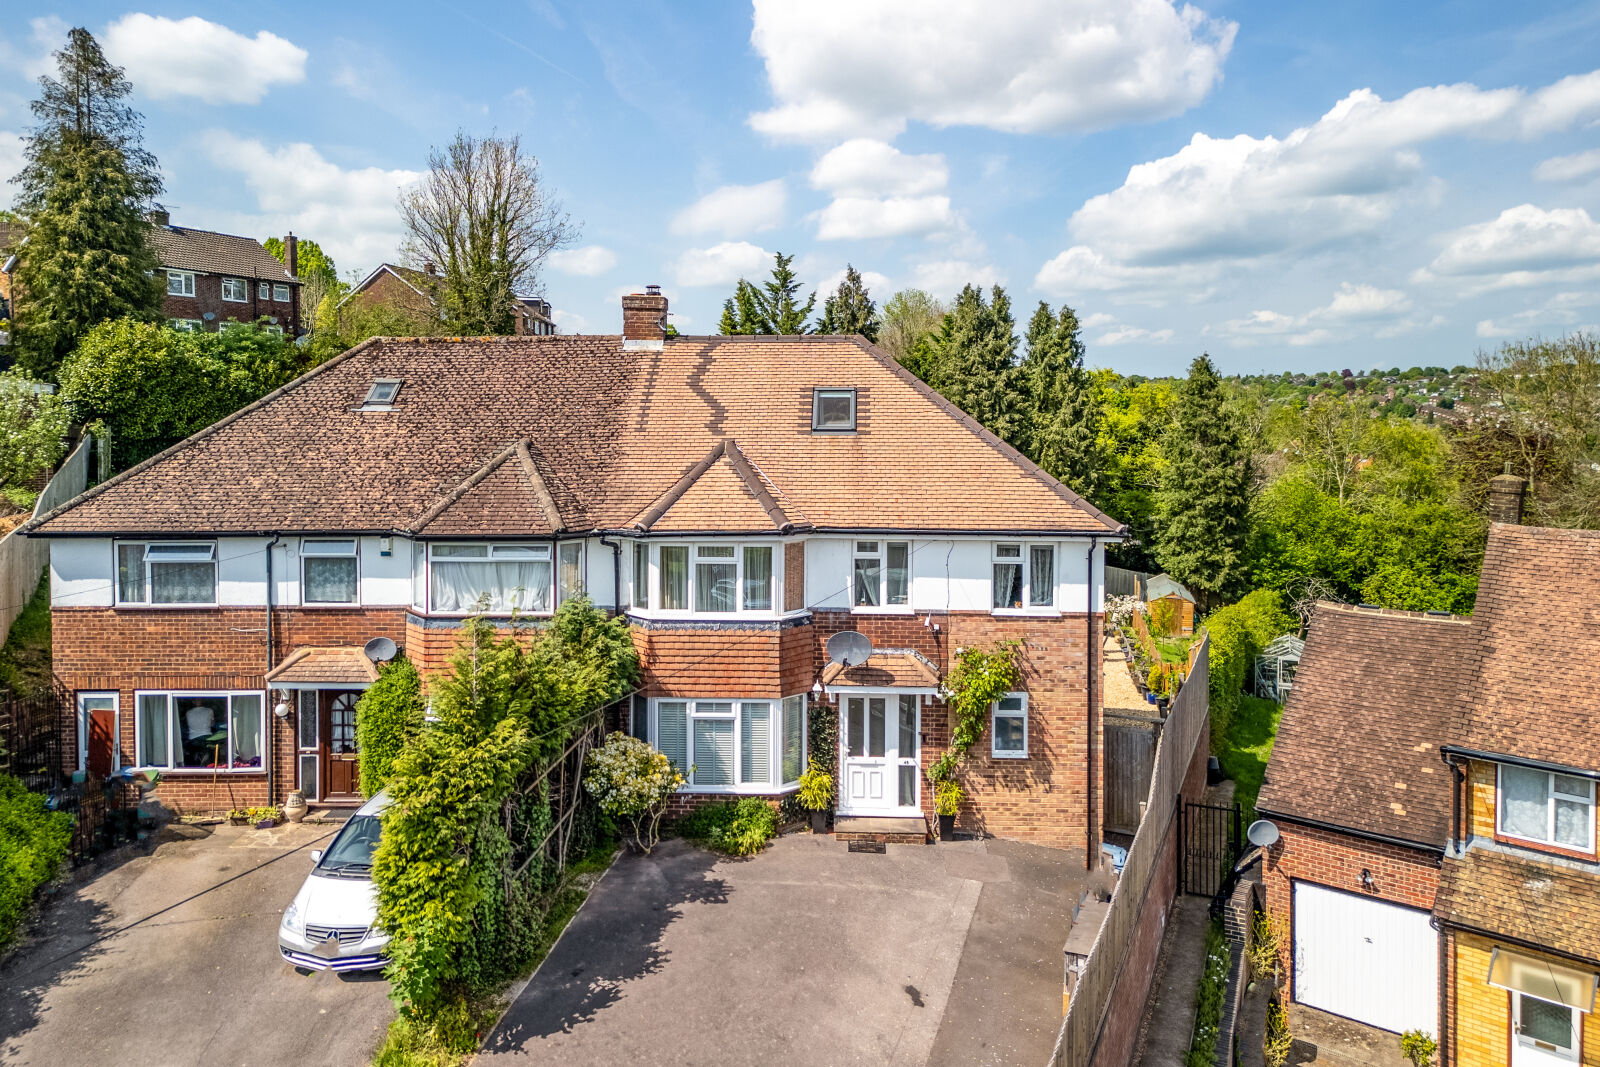 5 bedroom semi detached house for sale Dean Close, High Wycombe, HP12, main image